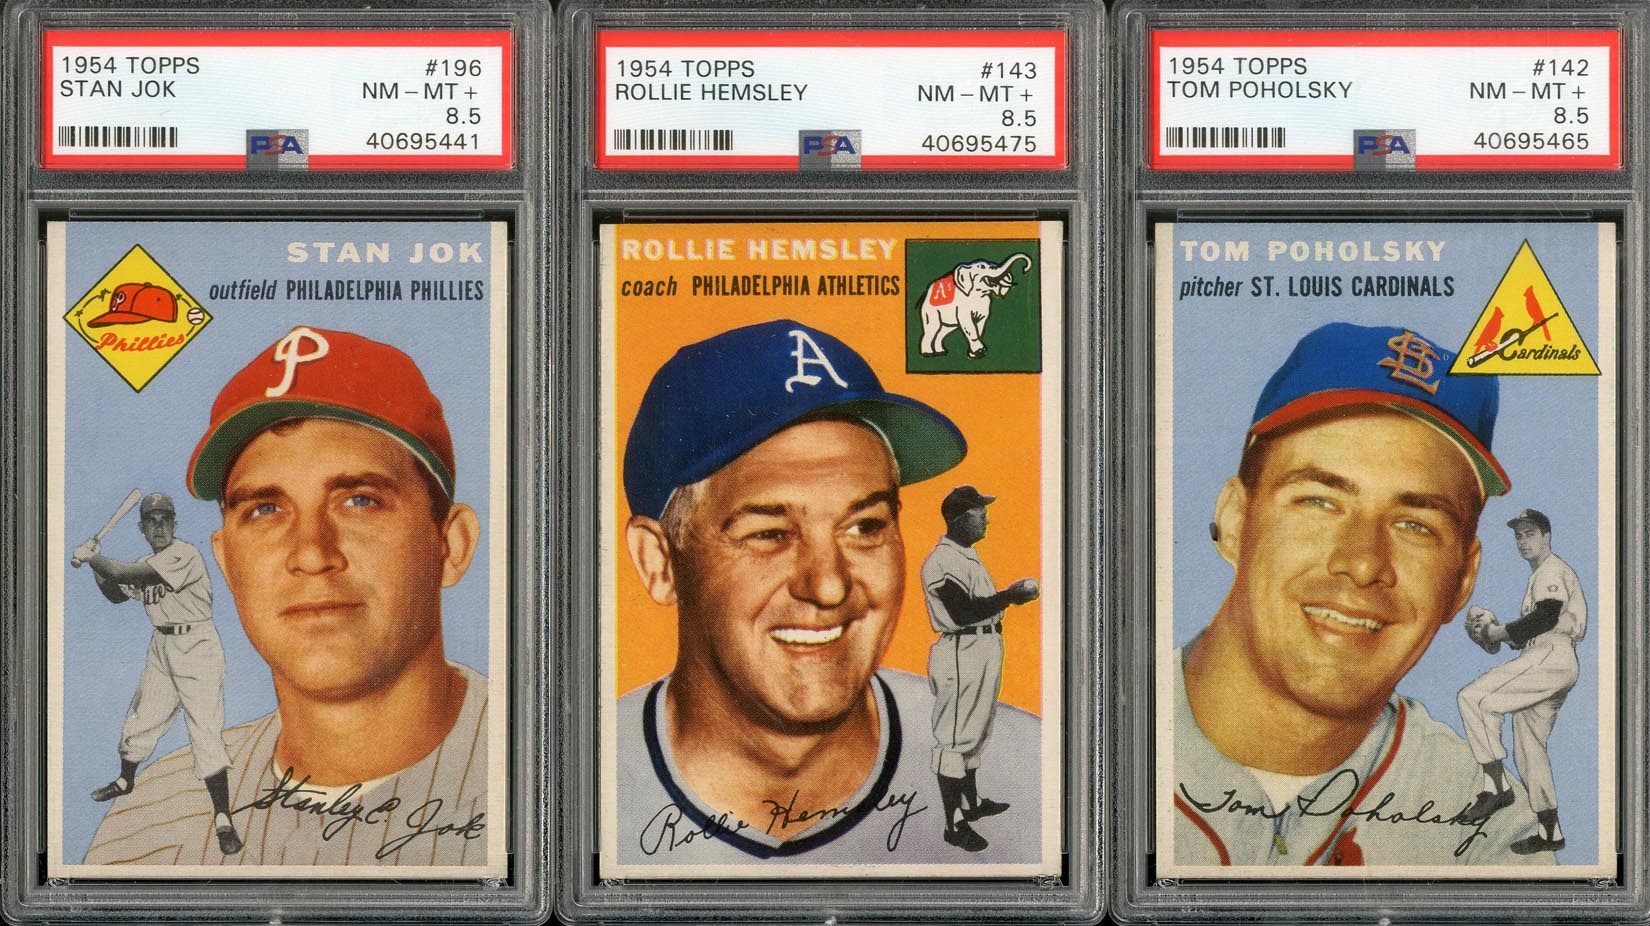 Baseball and Trading Cards - 1954 Topps PSA NM-MT+ 8.5 Collection (3)